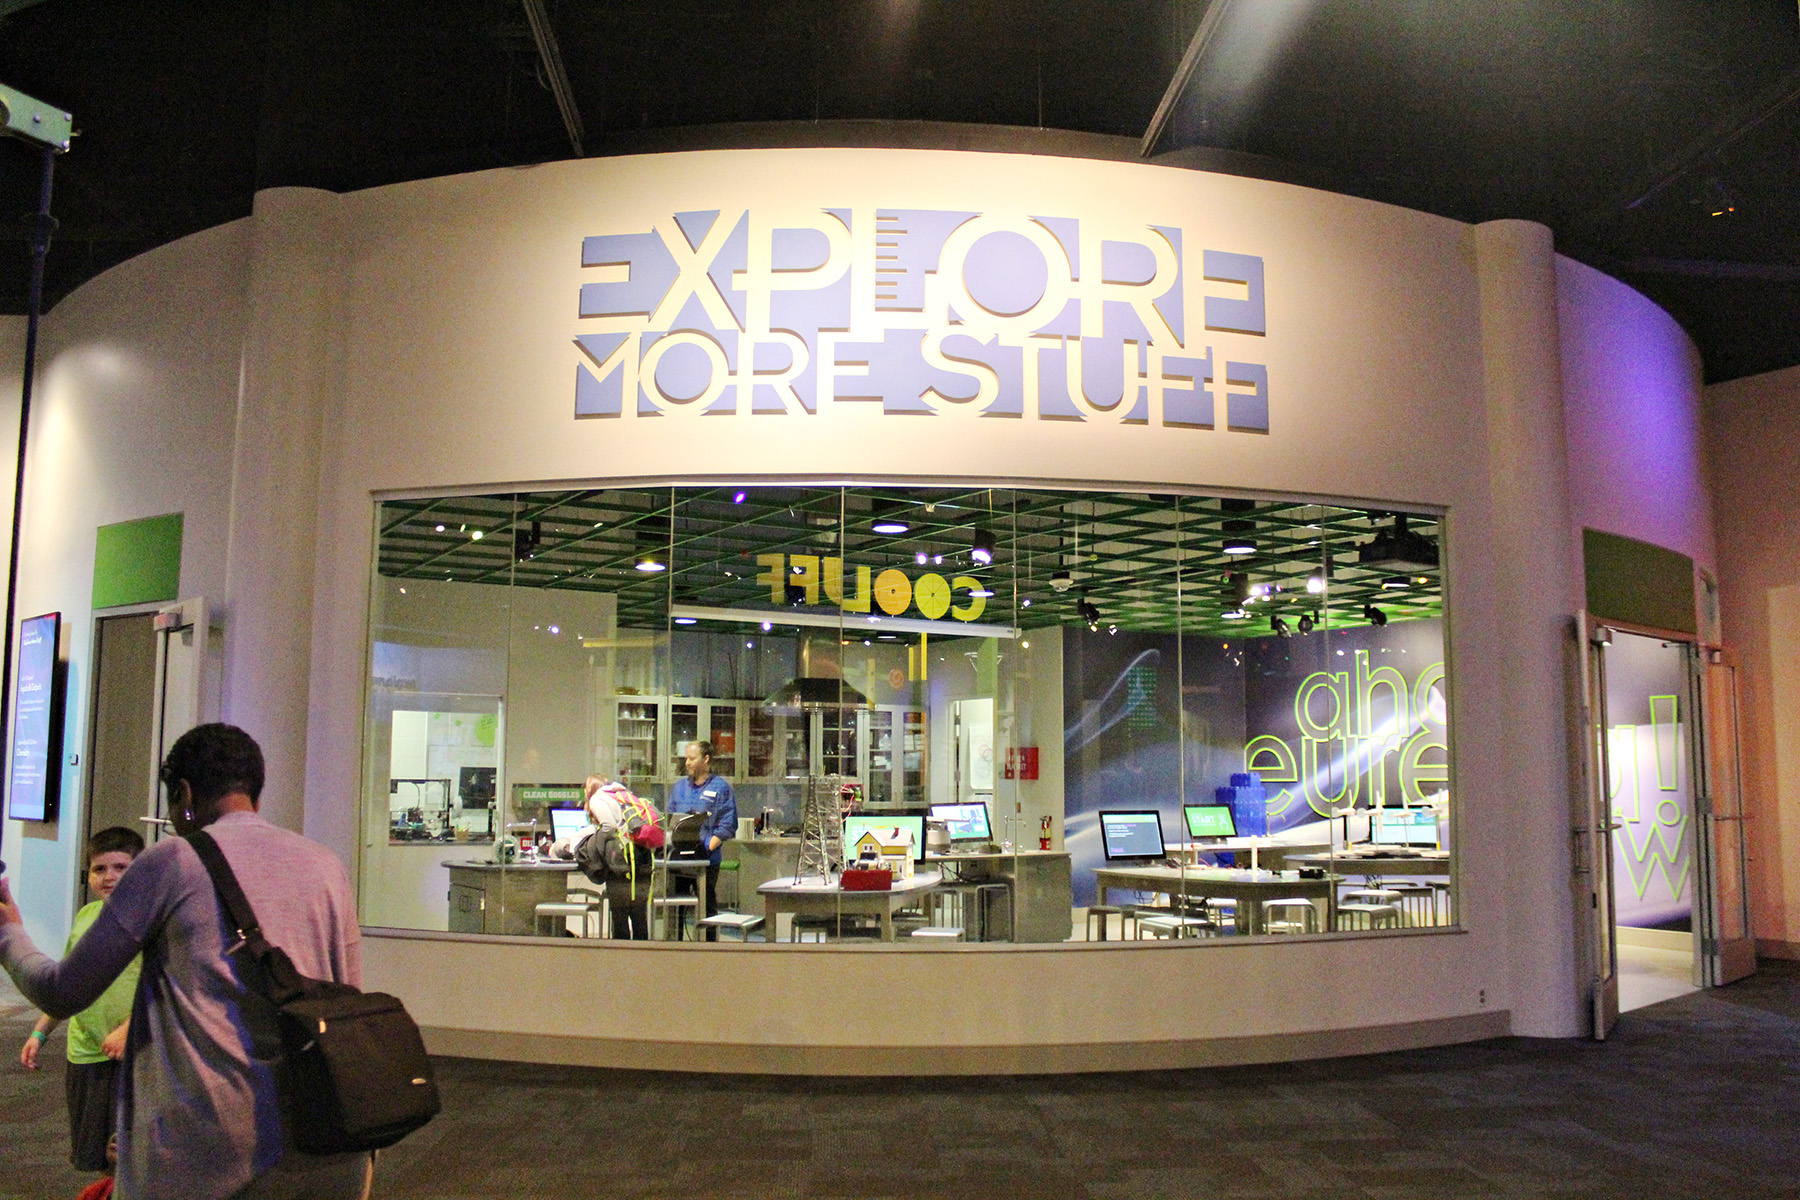 discovery center